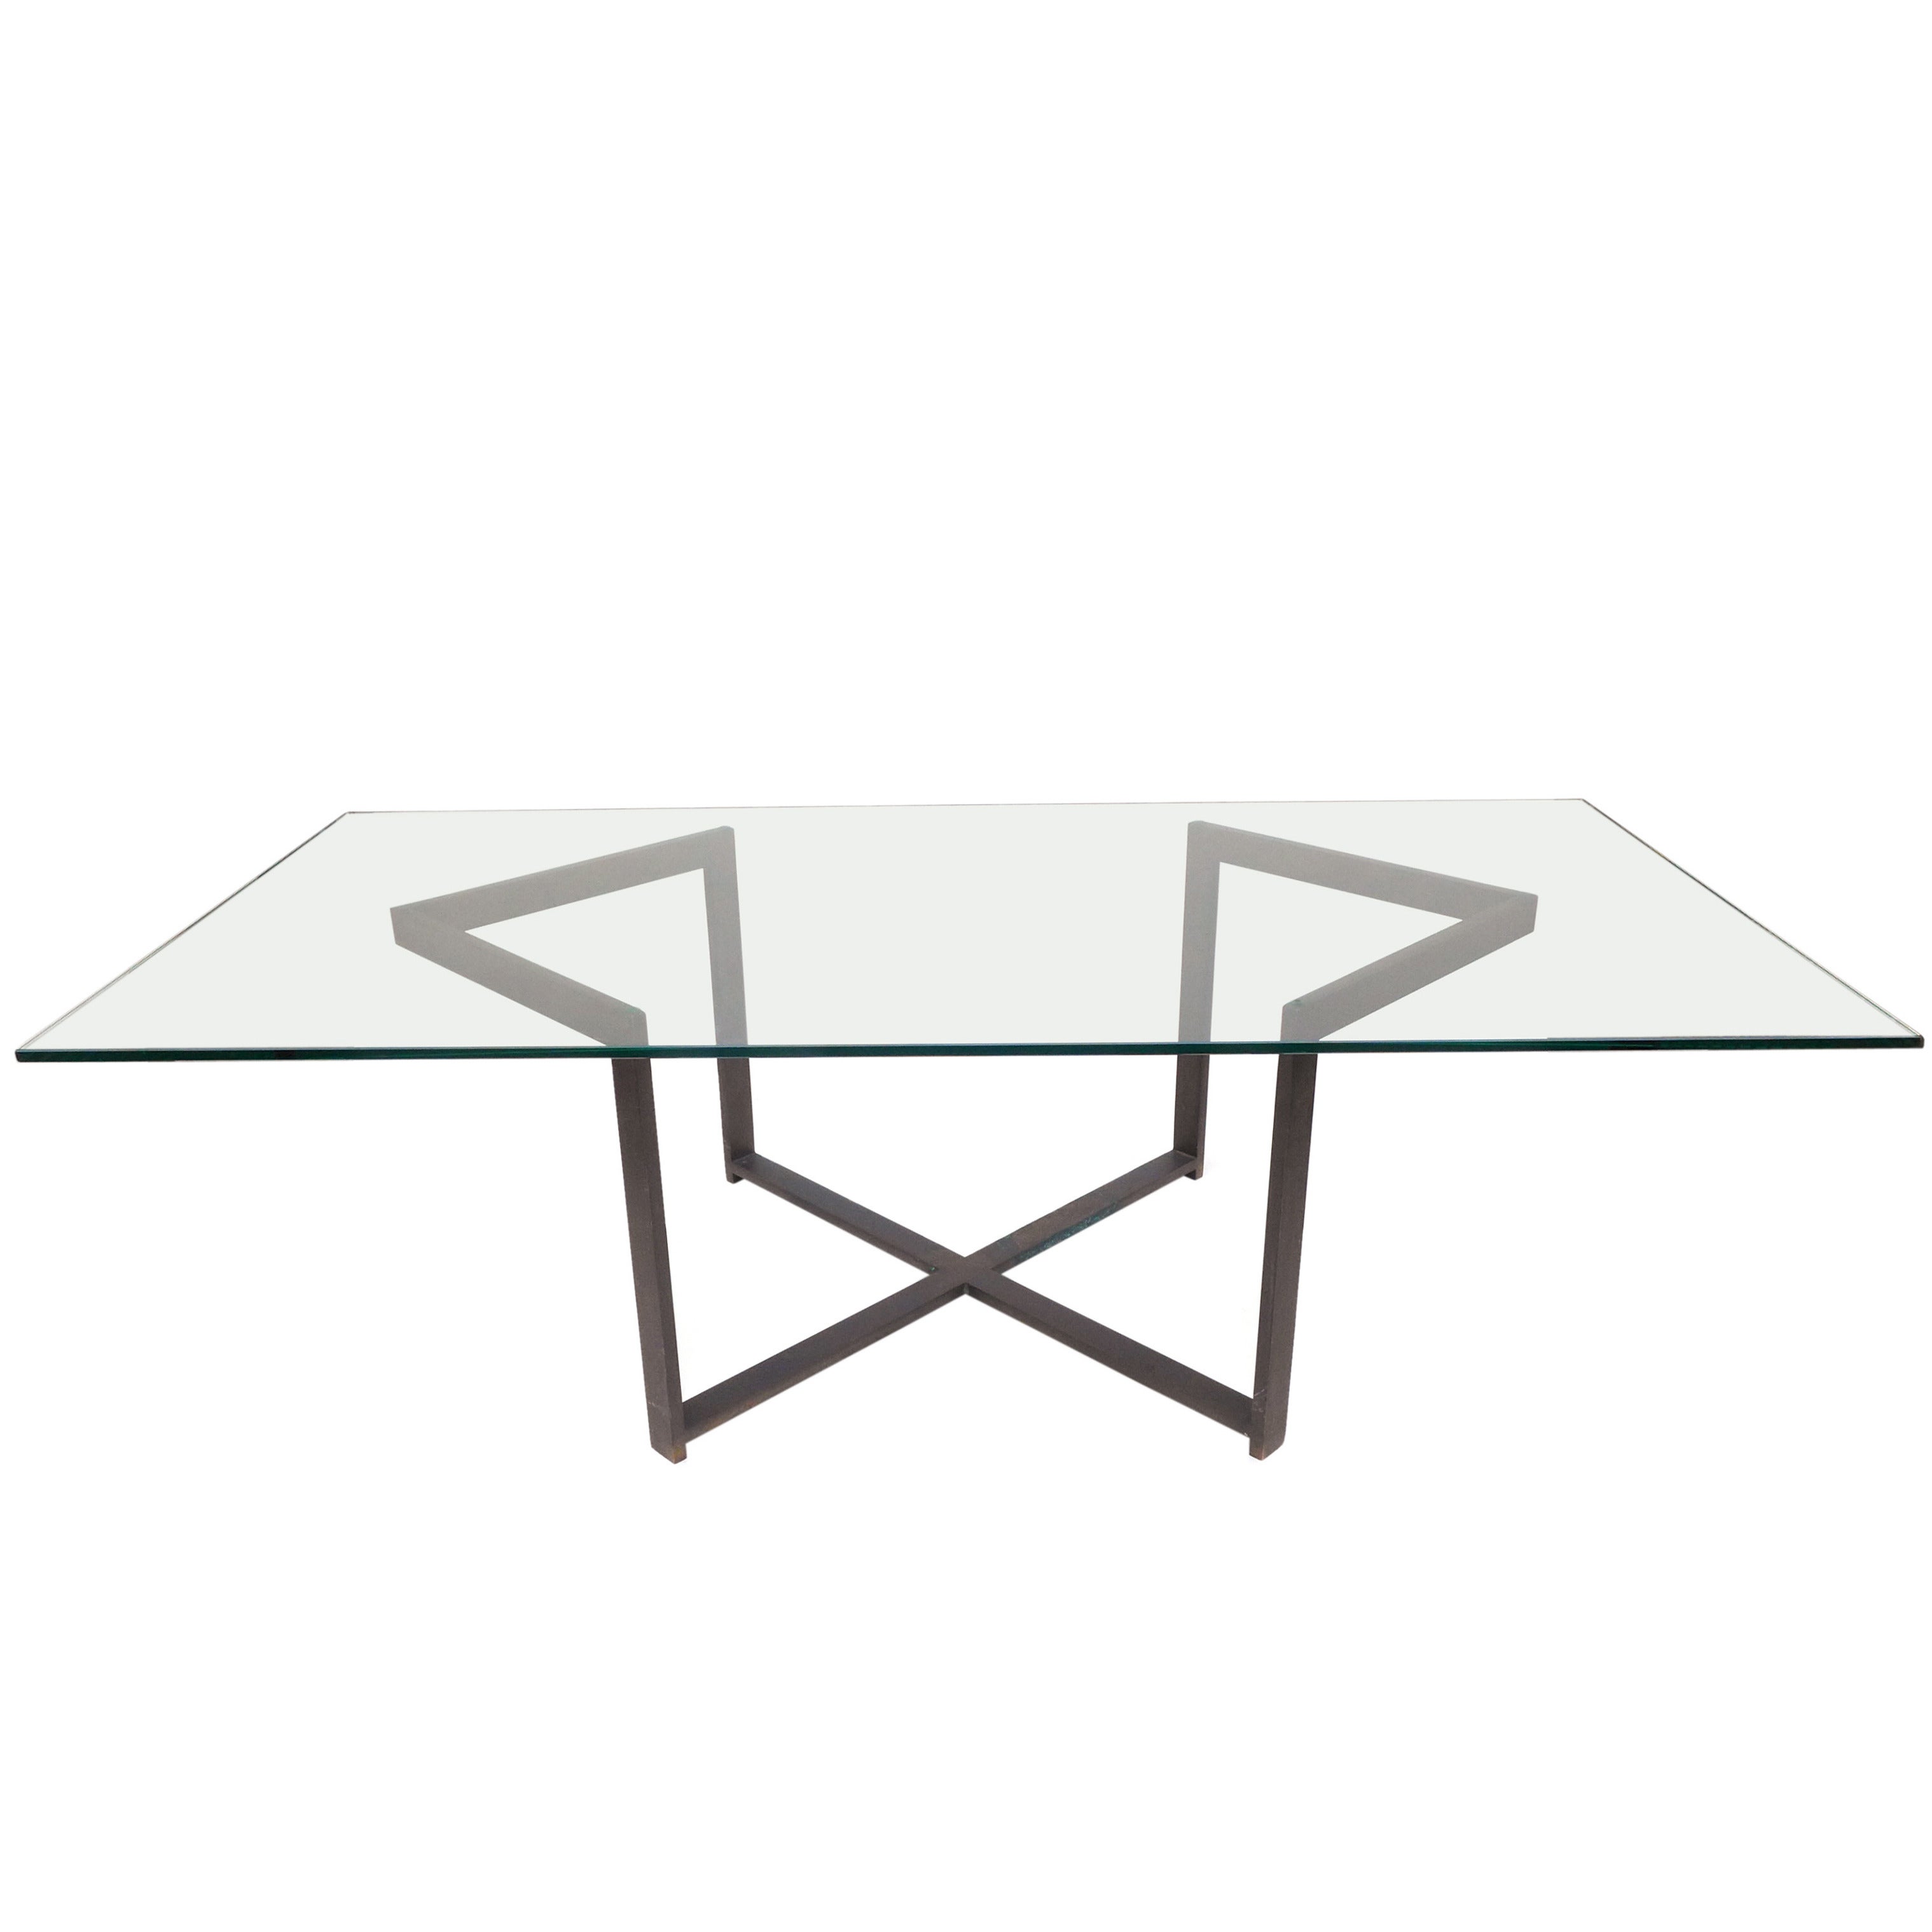 Bronze and Glass Coffee Table